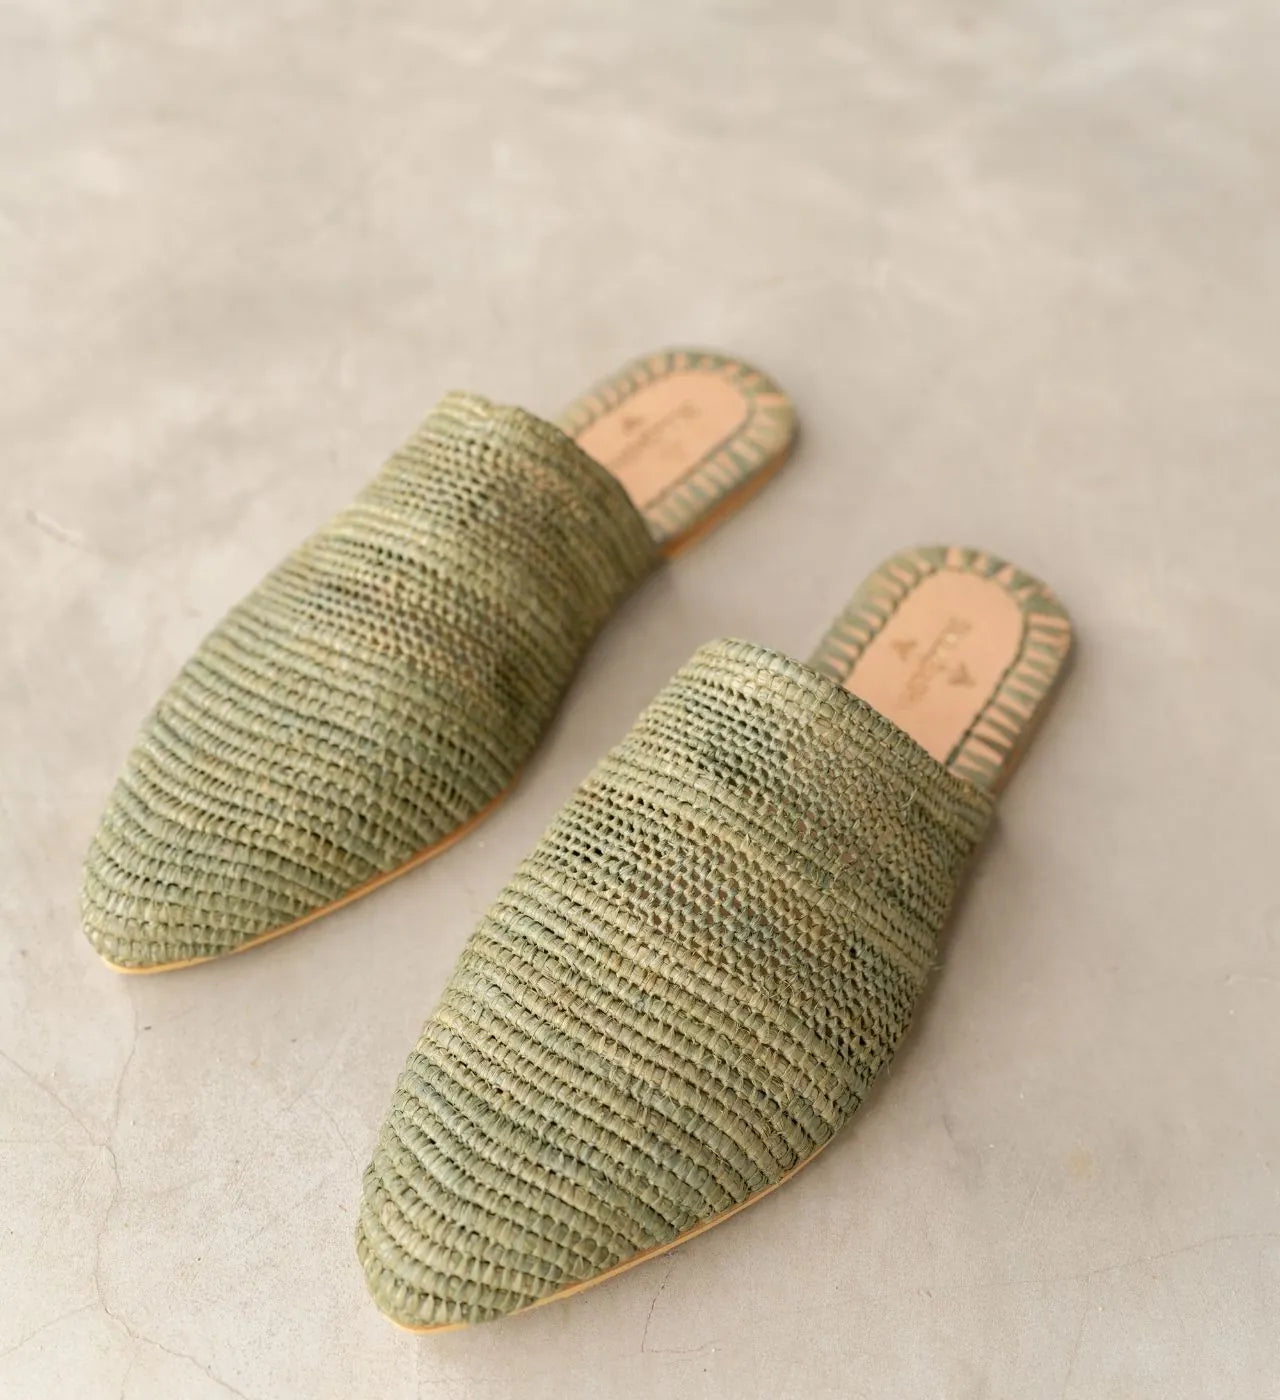 Babouche Tayri Green, sustainable, handmade sandals made from natural materials by Bulibasha